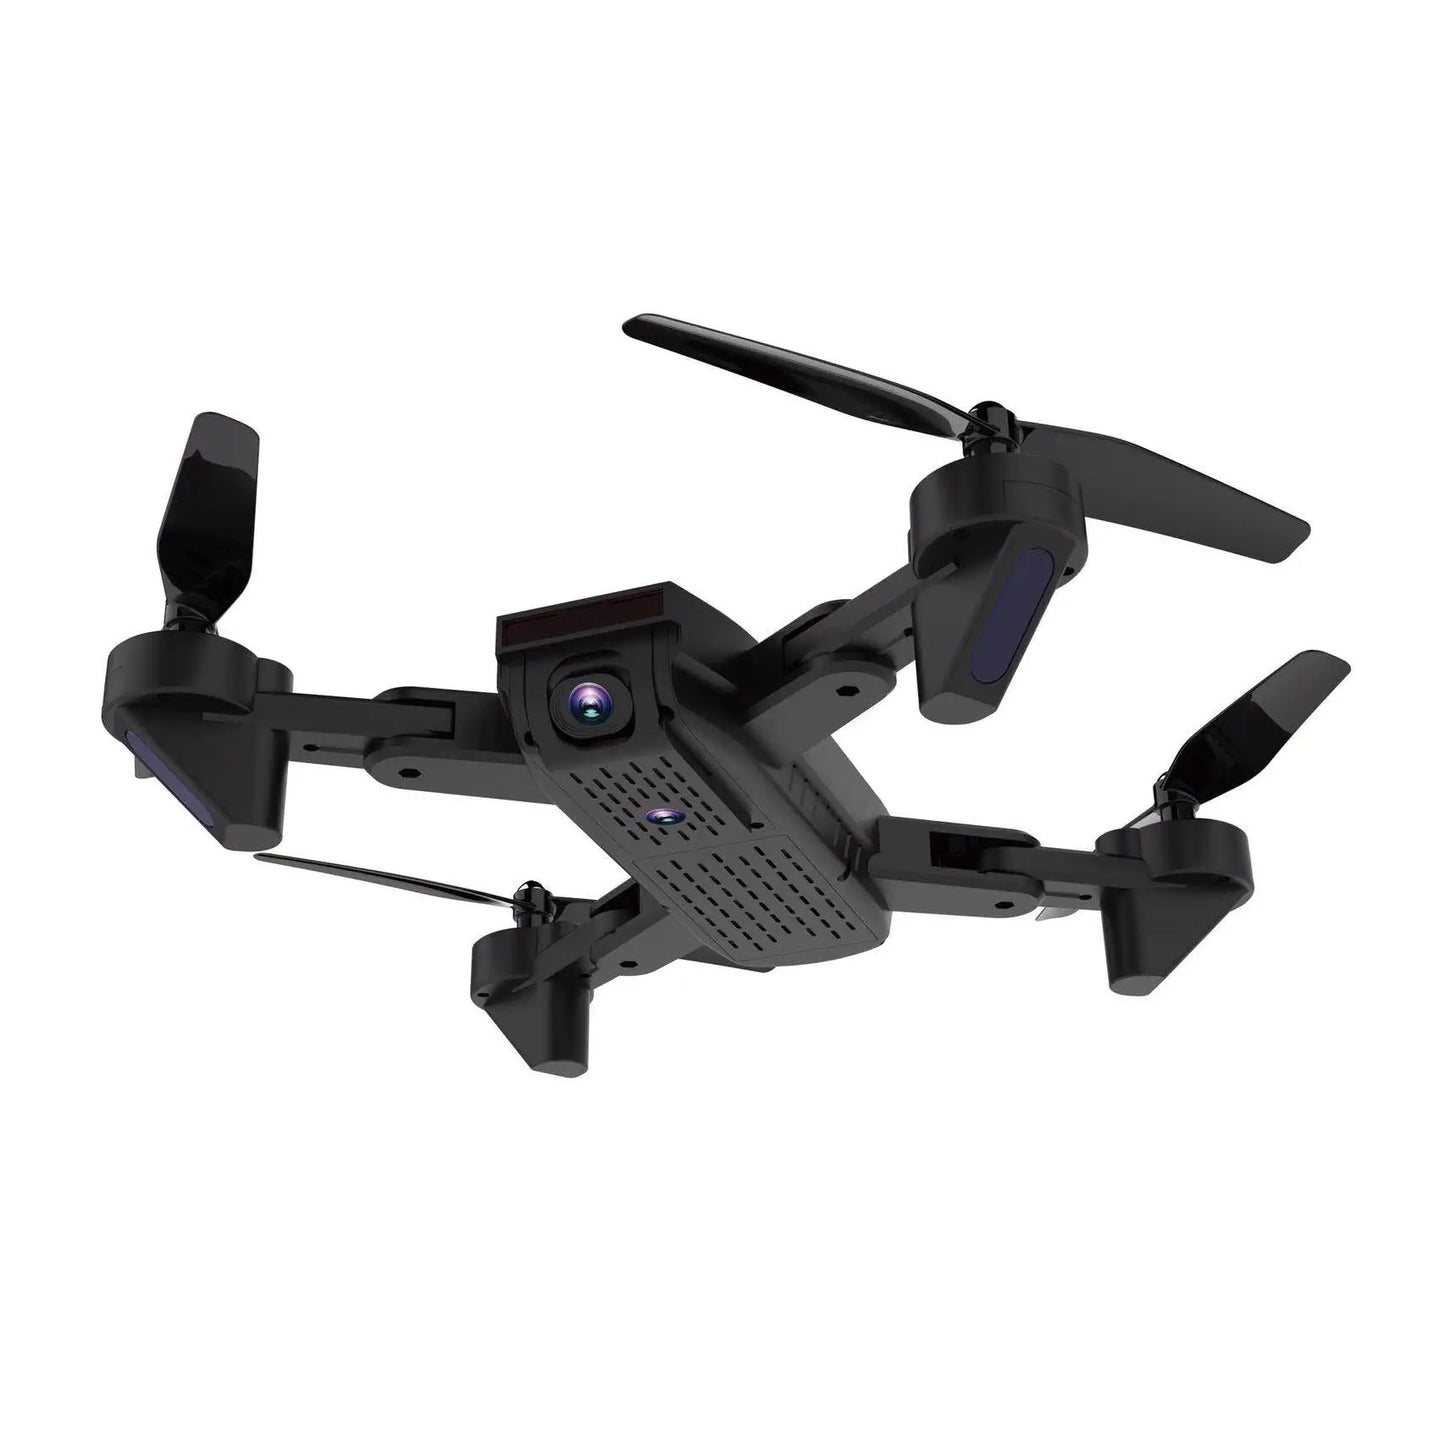 Adventure Awaits: Wide-Angle Drone with Advanced Features